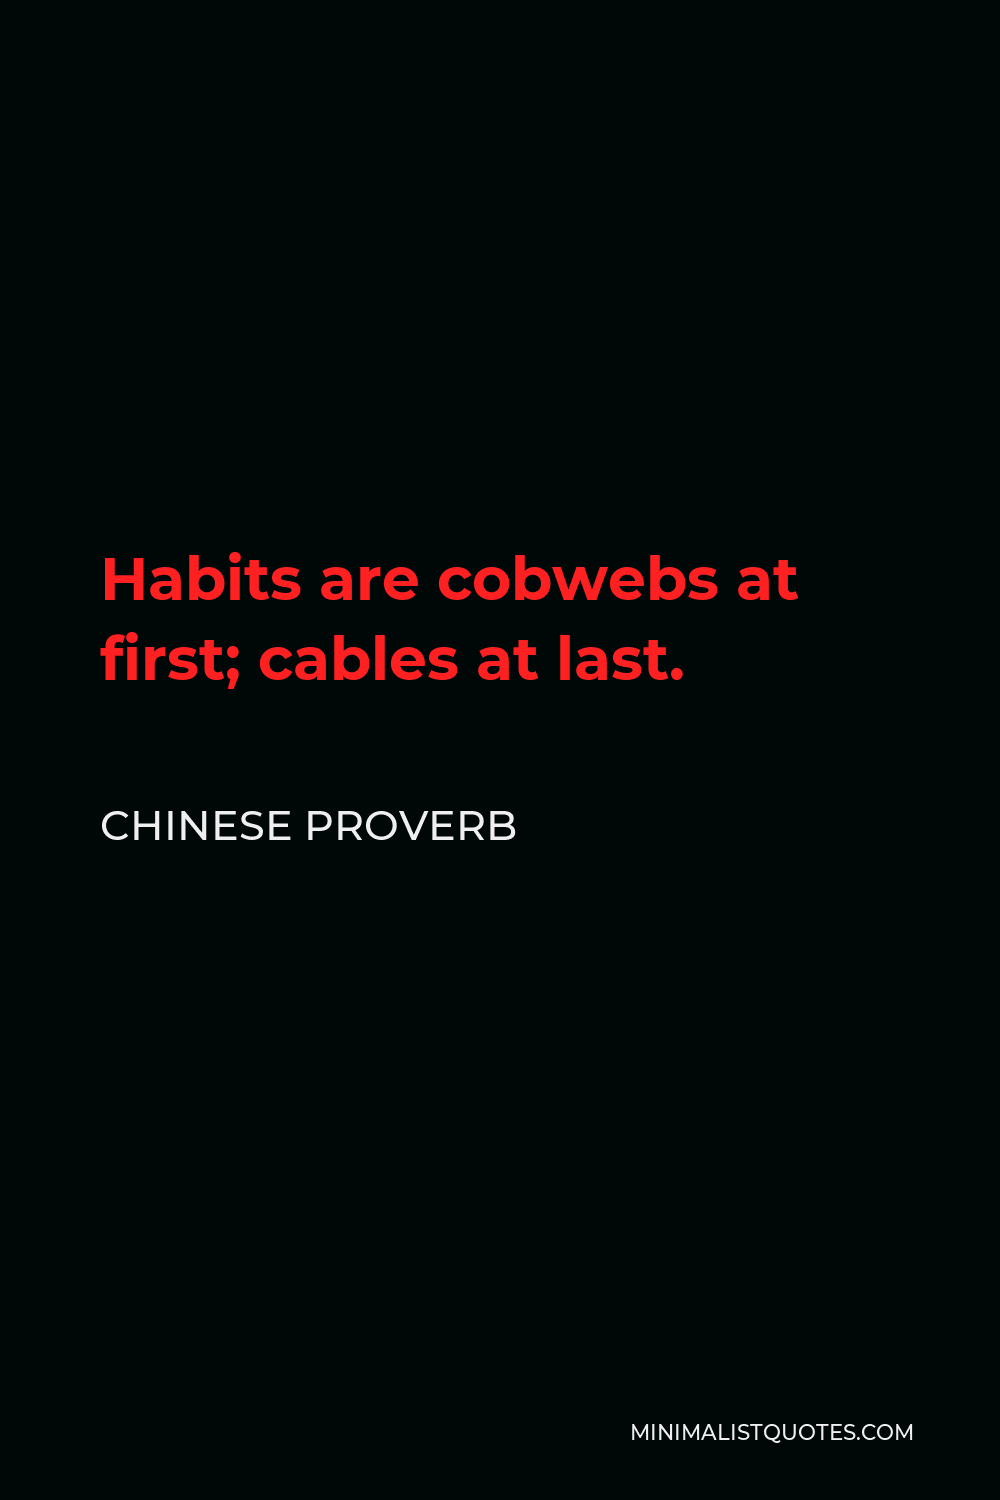 Chinese Proverb Quote - Habits are cobwebs at first; cables at last.